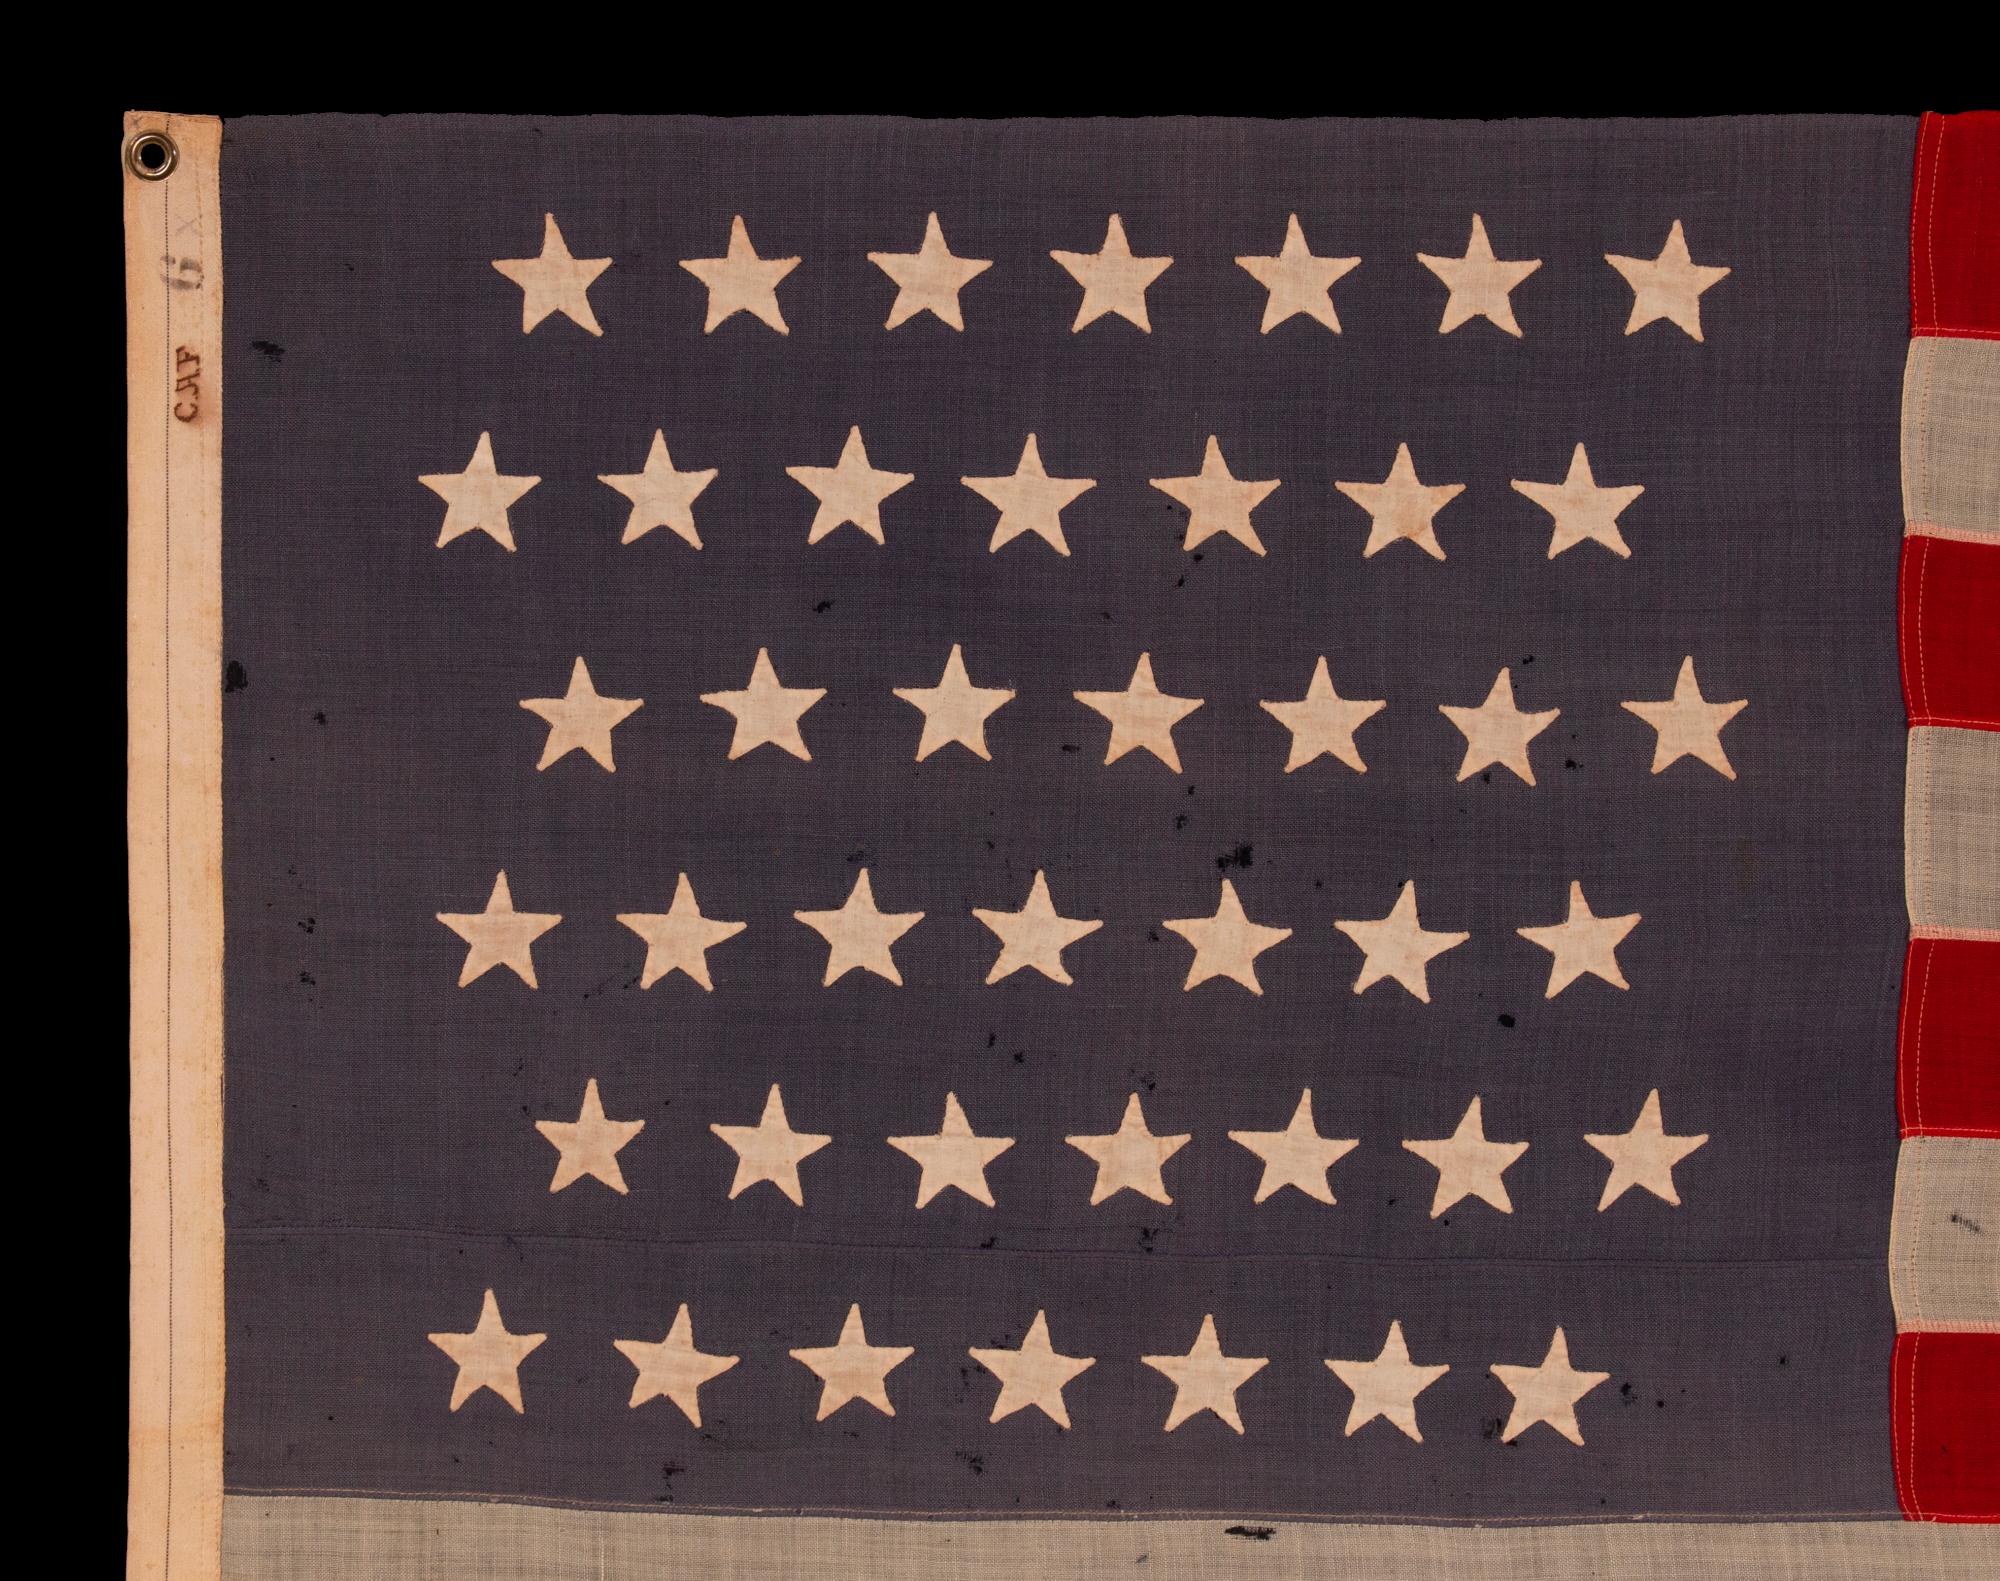 42 Hand-sewn Stars on an Antique American Flag with a Dusty Blue Canton; An Unofficial Star Count, Reflects Washington Statehood, Circa 1889-1890:

42 star American national flag, with hand-sewn stars and attractive coloration. The 42 star flag is